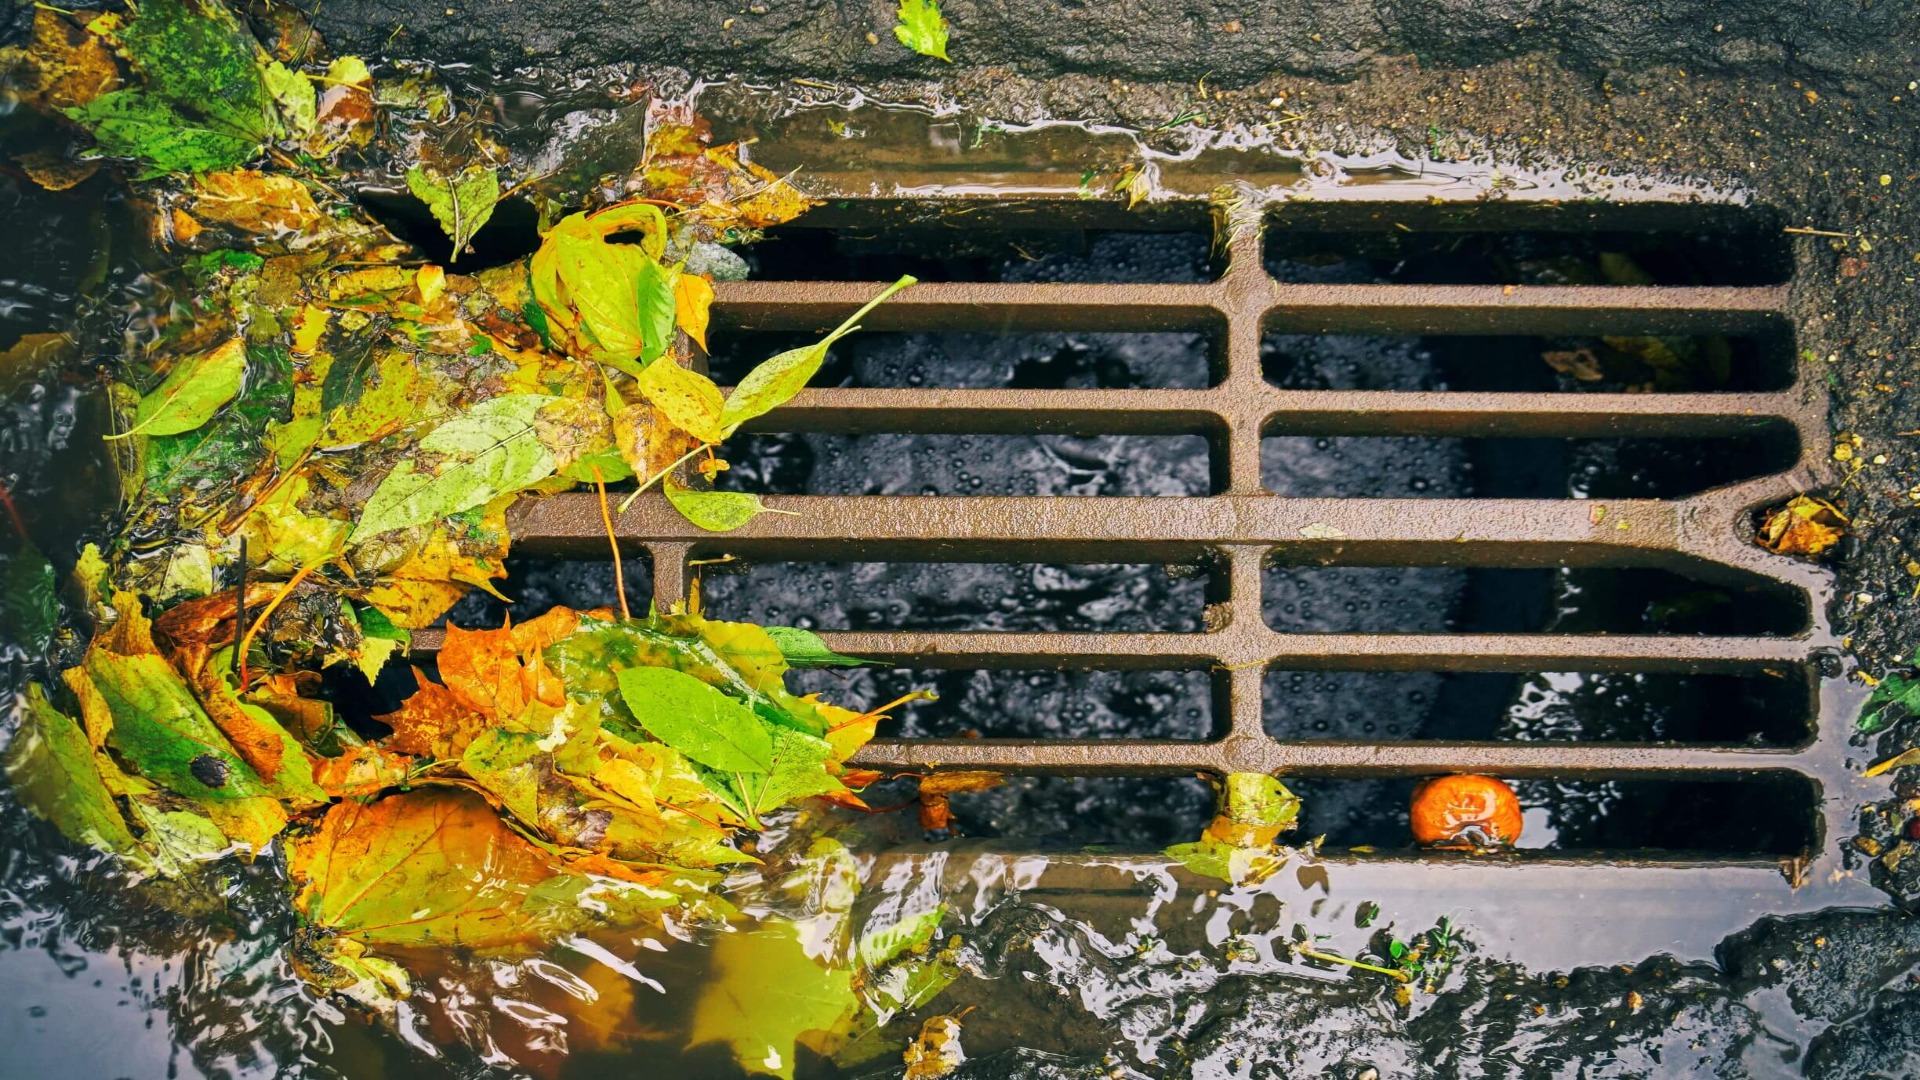 Stormwater Drain Autumn Leaves Washing In With Rain (1)